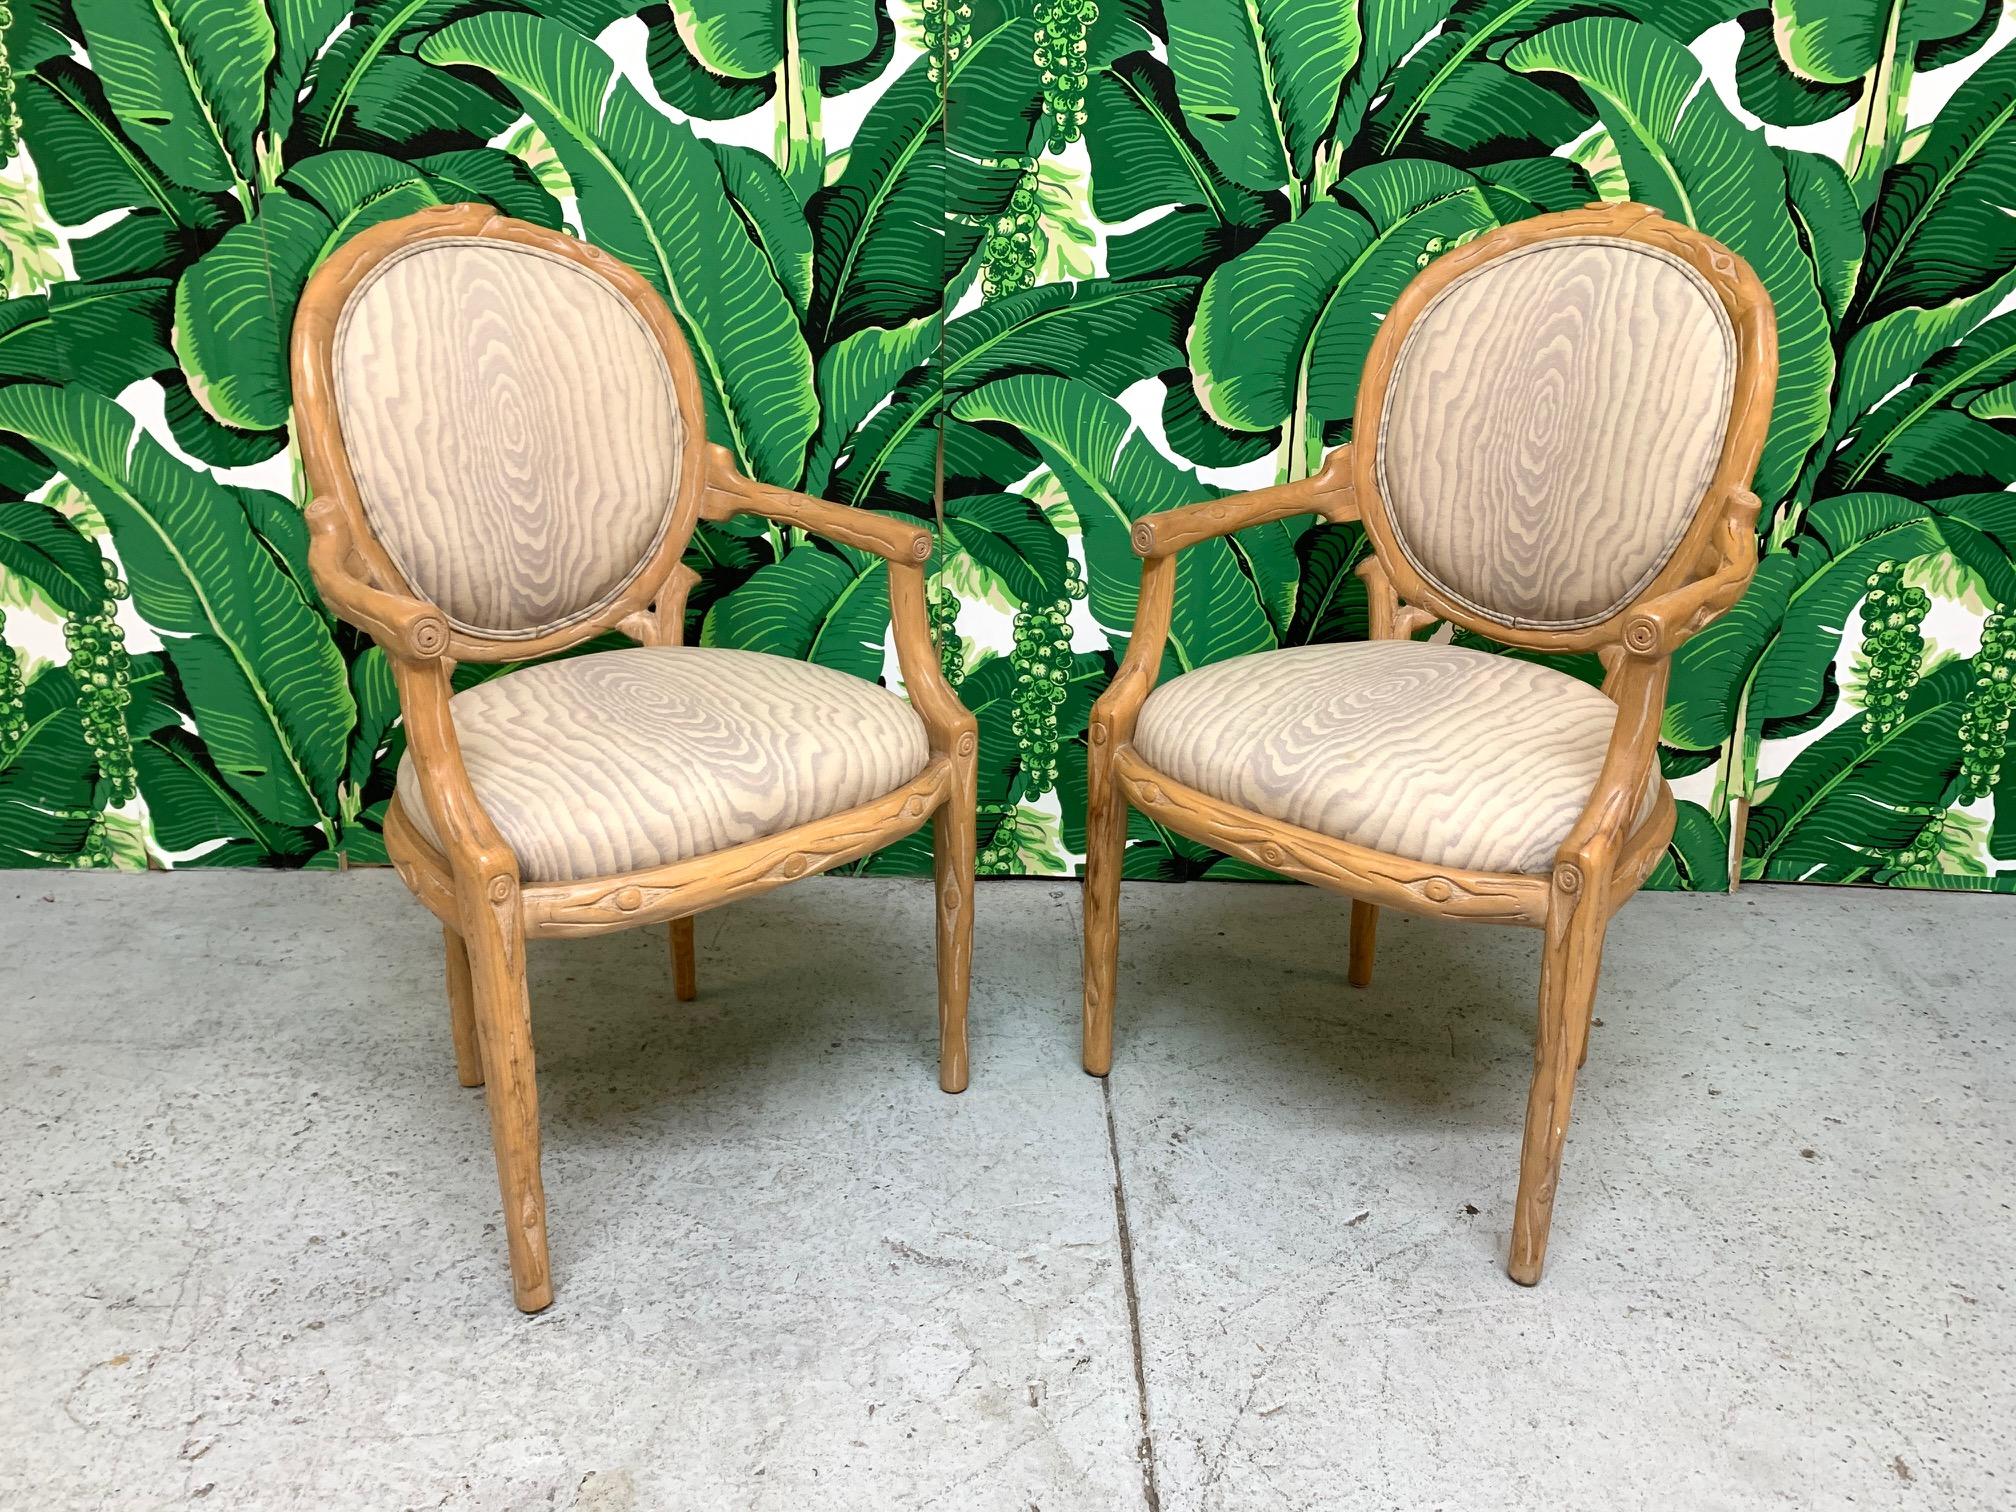 Set of 2 vintage faux bois carved dining chairs in excellent condition. Upholstery also in excellent condition. Seat height is 19.5